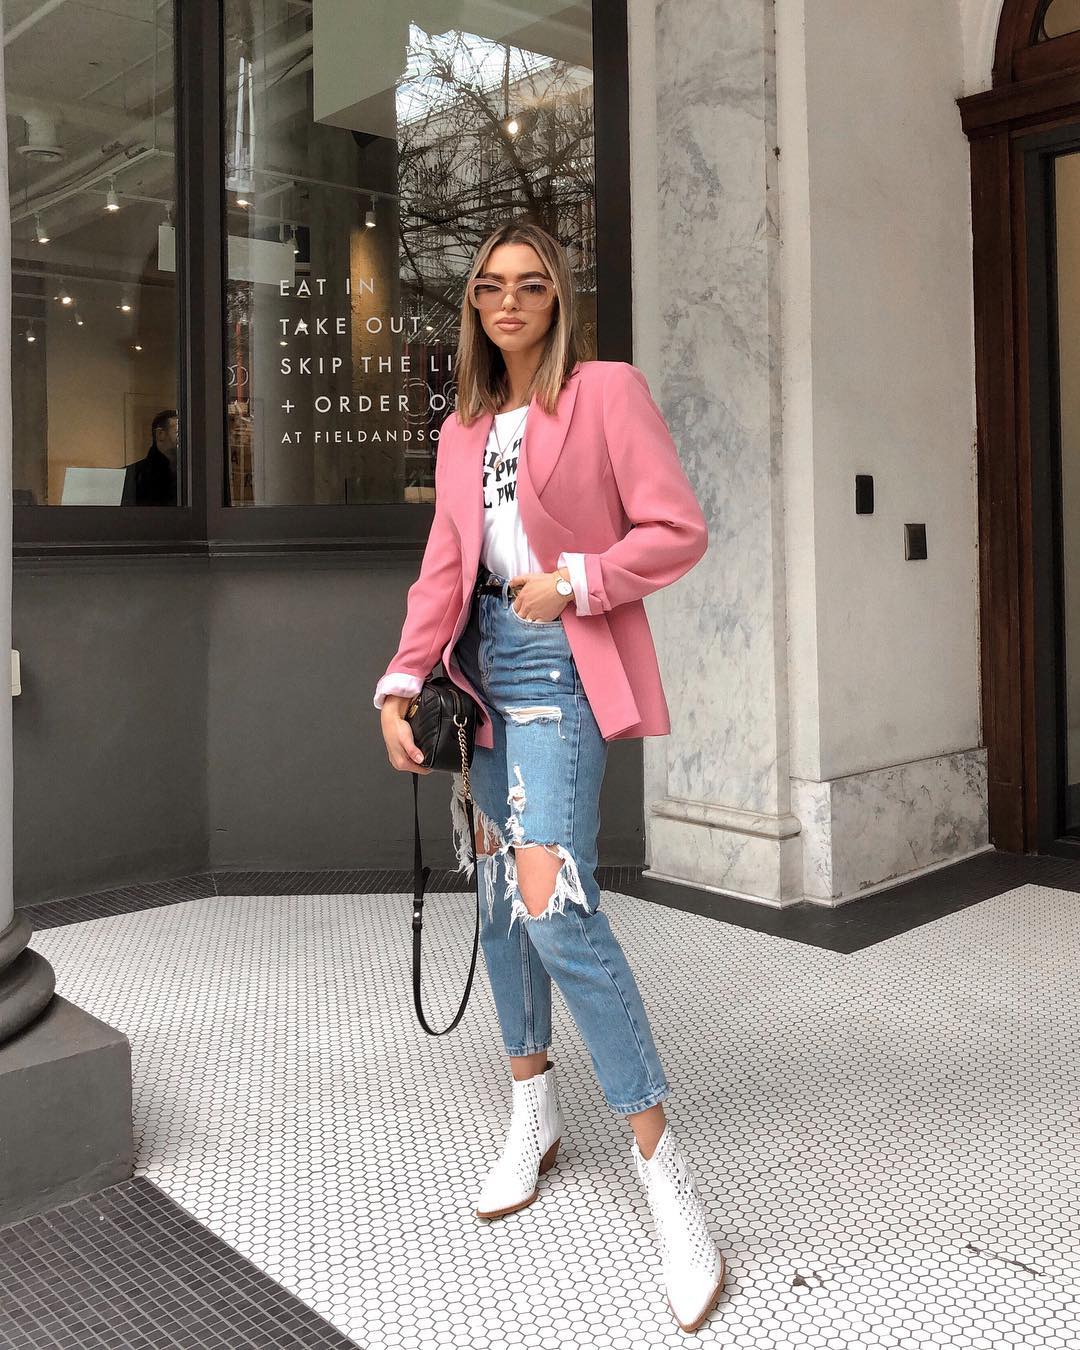 spring outfit ideas - pink blazer + distressed jeans + white boots + graphic tee